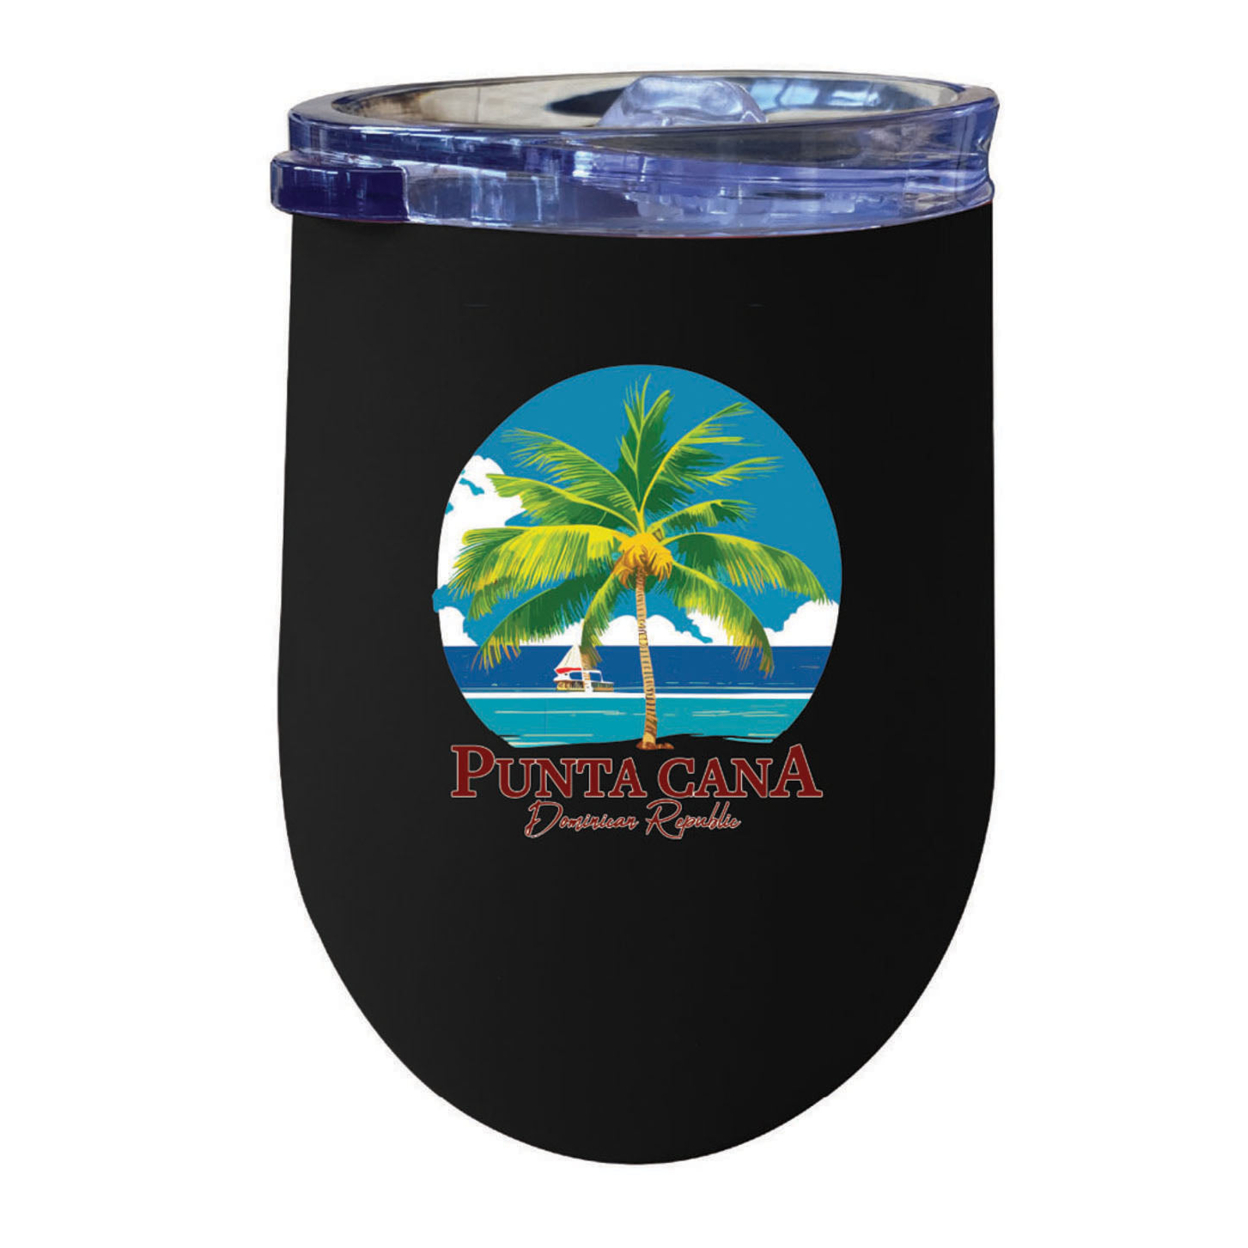 Punta Cana Dominican Republic Souvenir 12 Oz Insulated Wine Stainless Steel Tumbler - White, PARROT